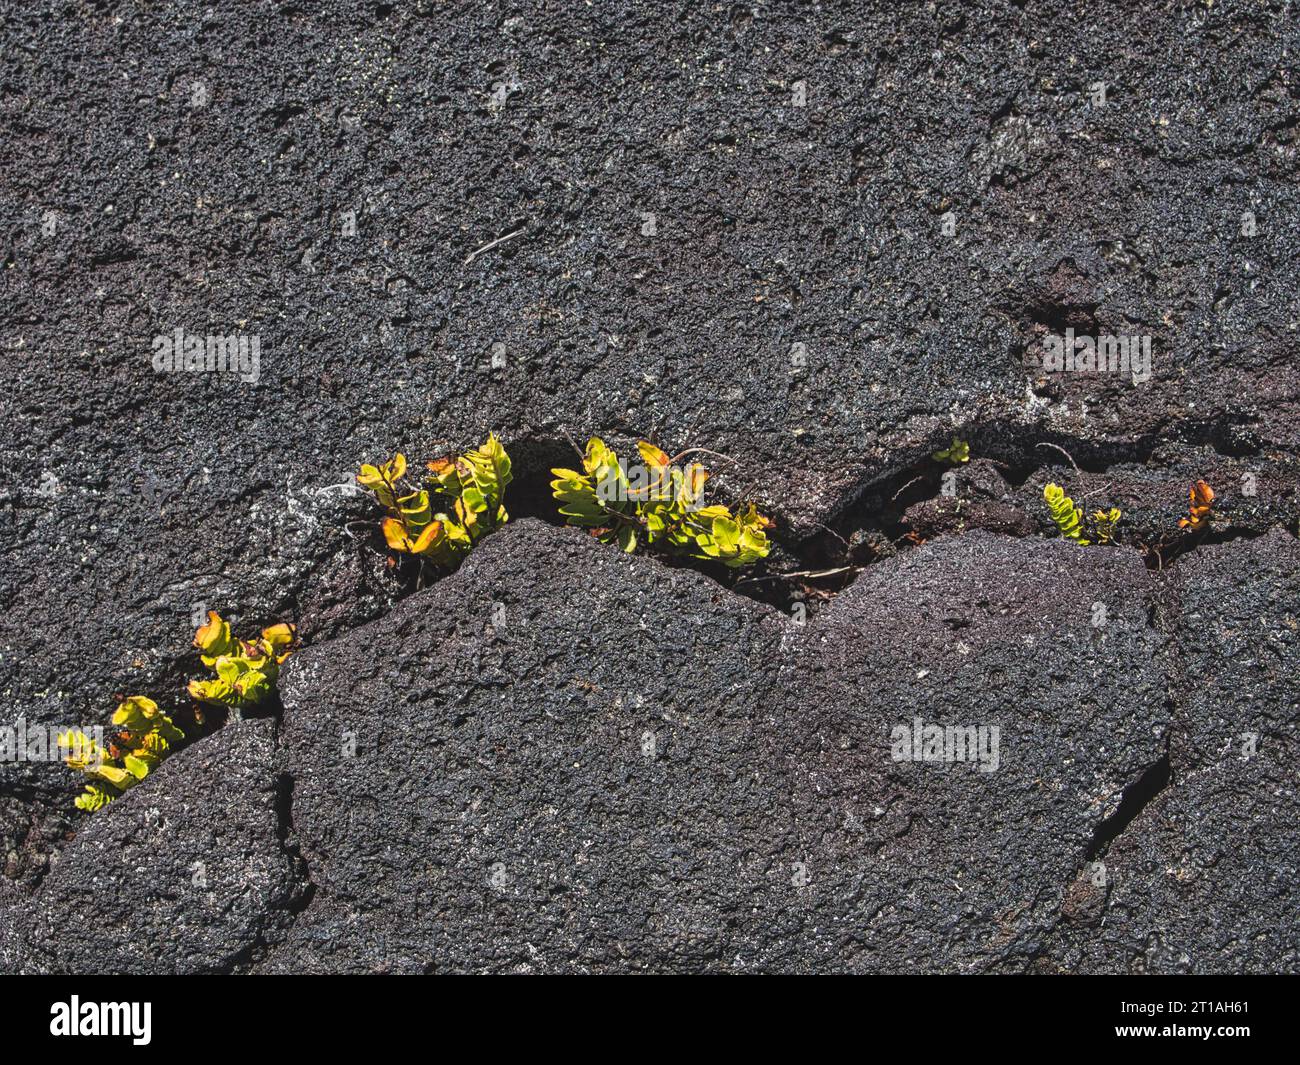 Small green plants grow through a small crack/crevice in lava rock in Hawaii, Volcanoes National Park. Stock Photo